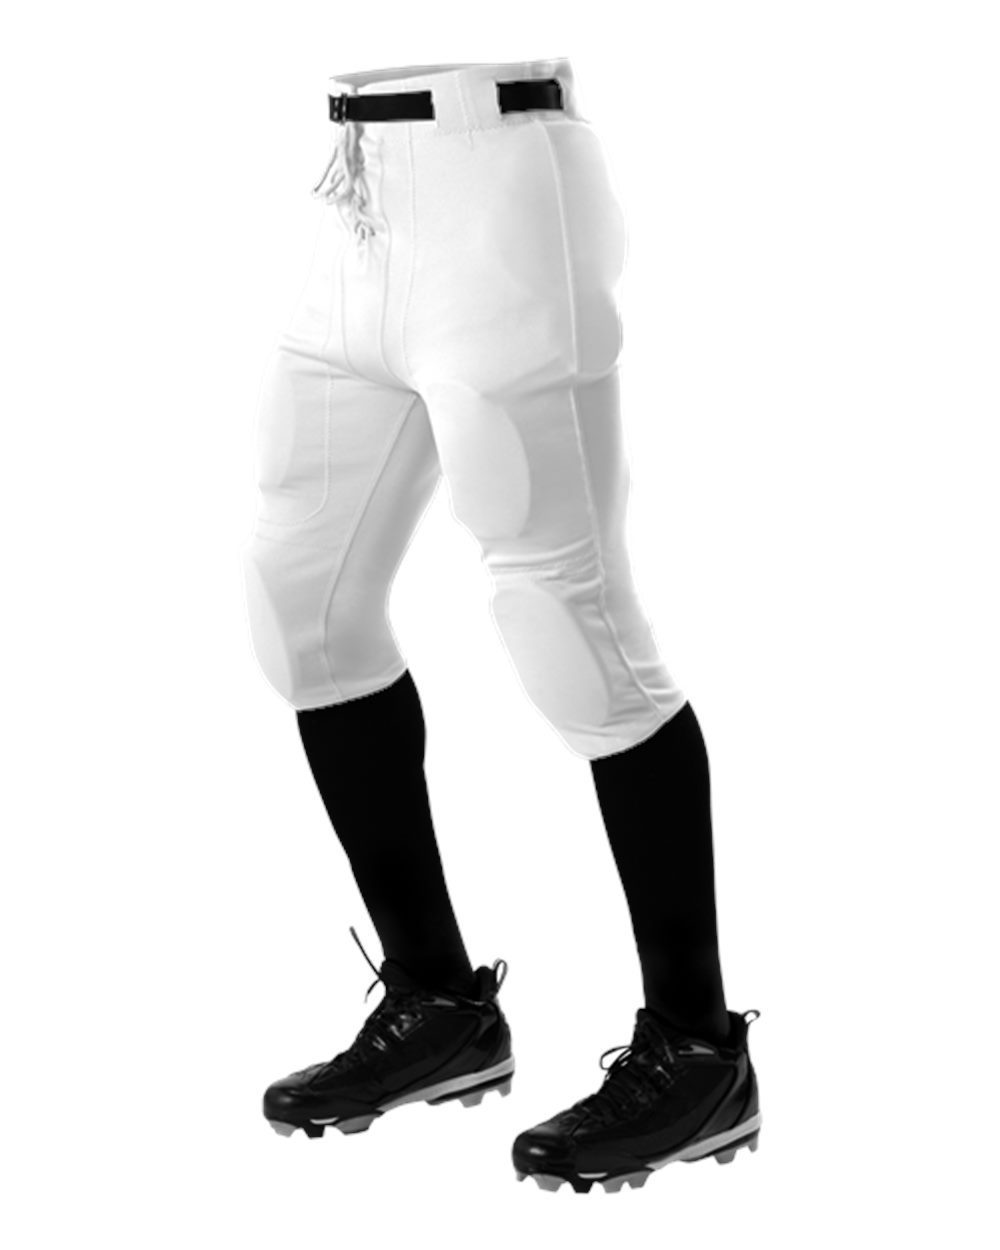 6 Colors/13 Youth & Adult Sizes 2-Color Pipping Integrated 7-Pad Football Pants 